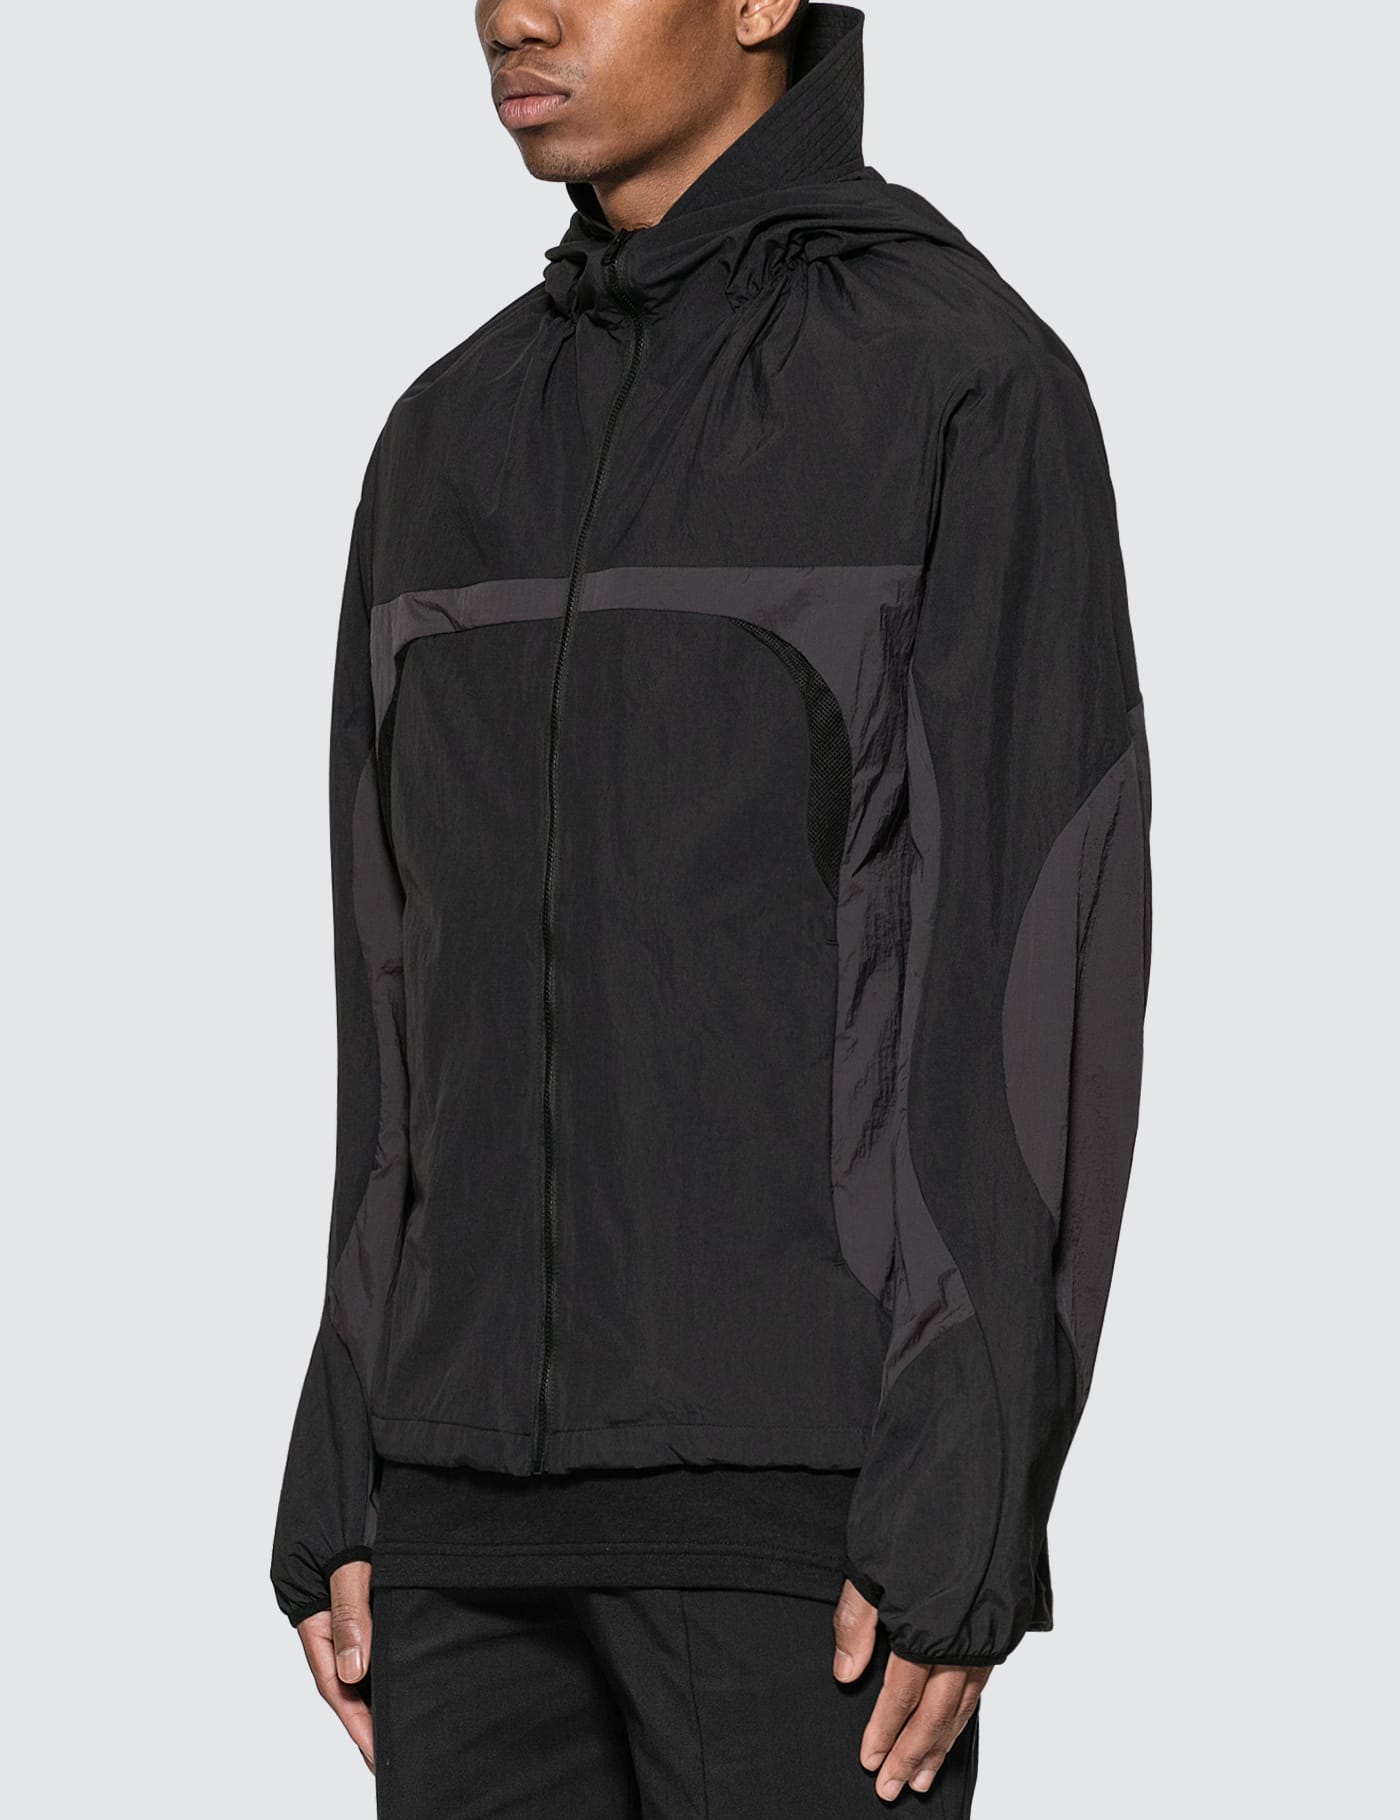 POST ARCHIVE FACTION (PAF) - 3.0 Technical Jacket Right | HBX